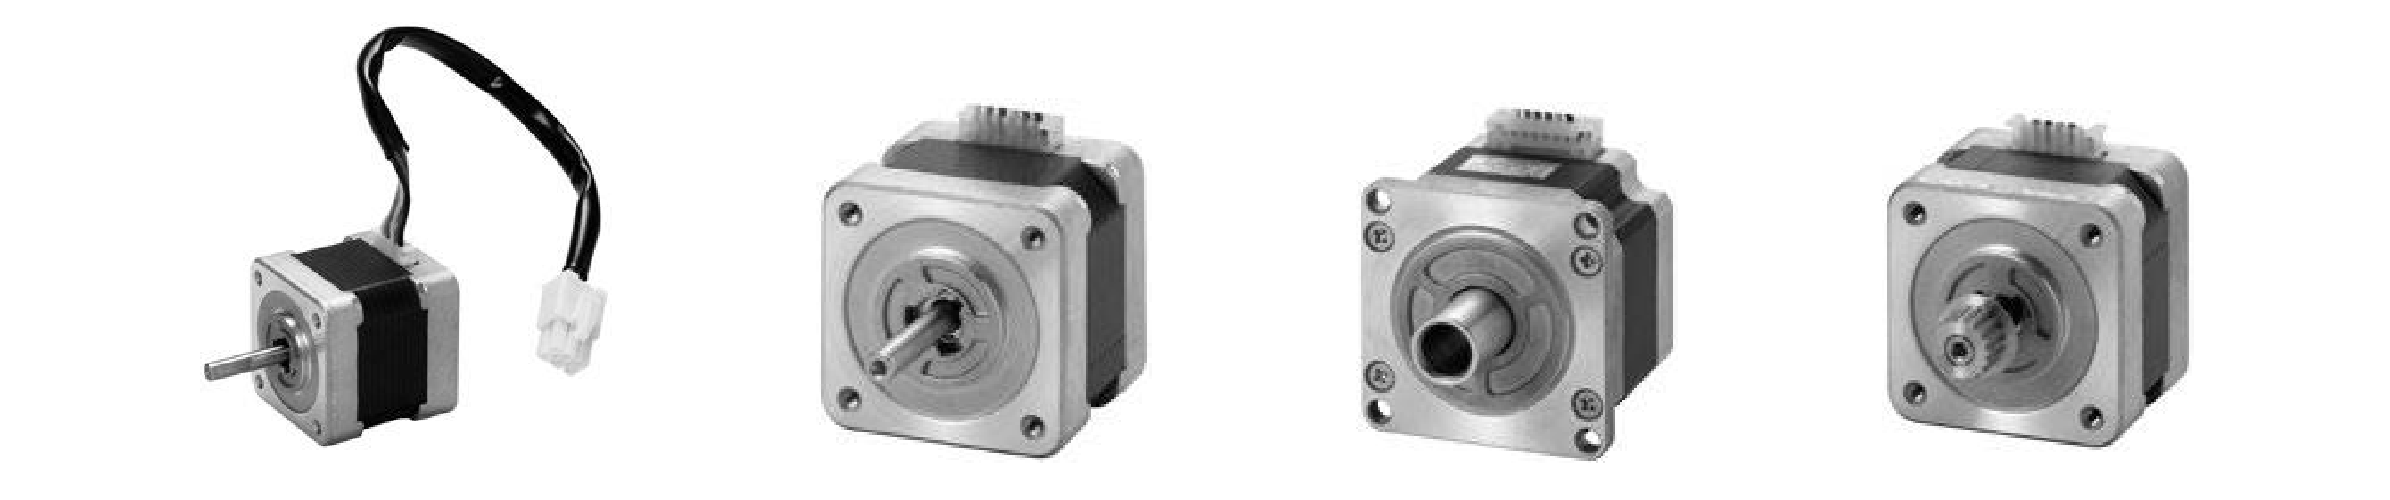 Stepper Motors with Shafts and Cable Modifications Image